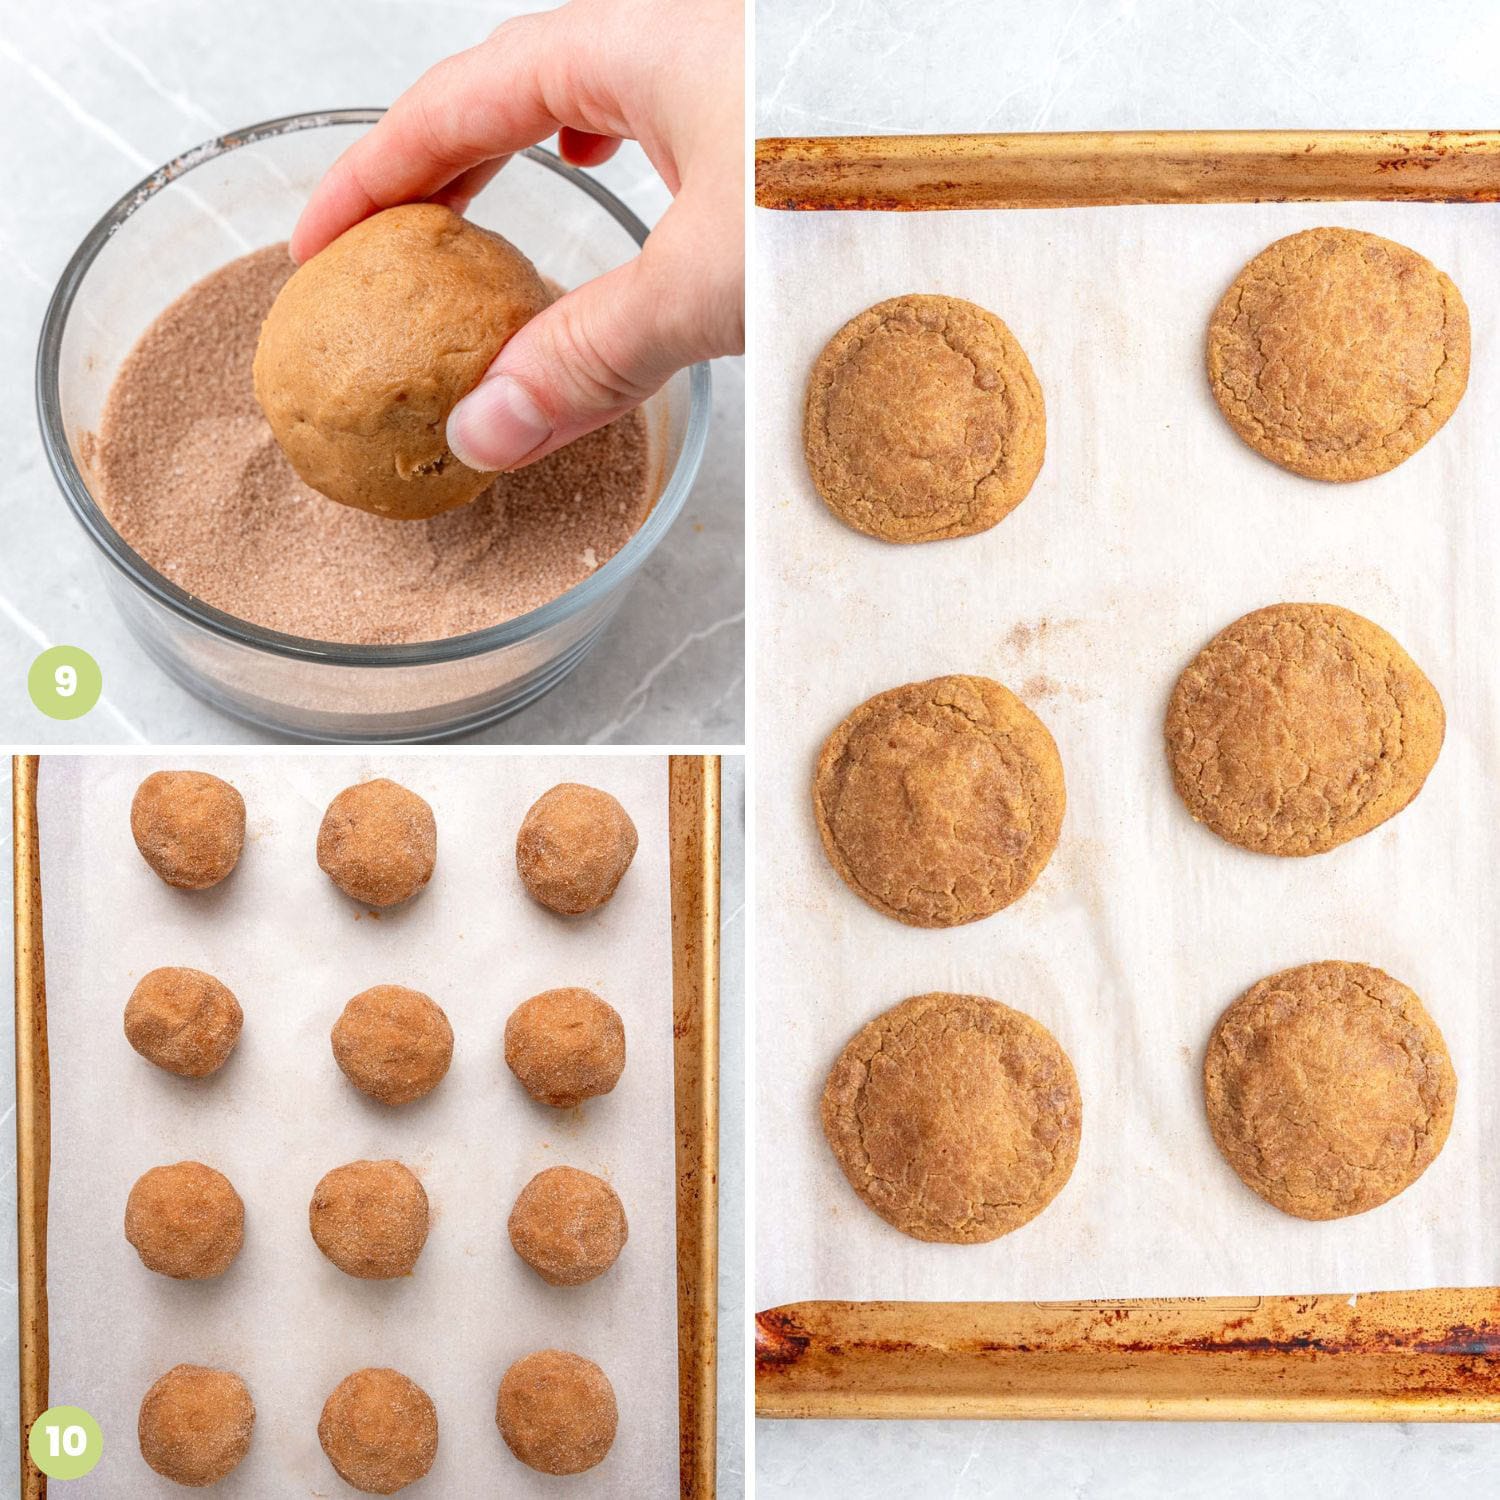 A collage of images showing how to bake pumpkin cheesecake cookies that have been rolled in cinnamon sugar